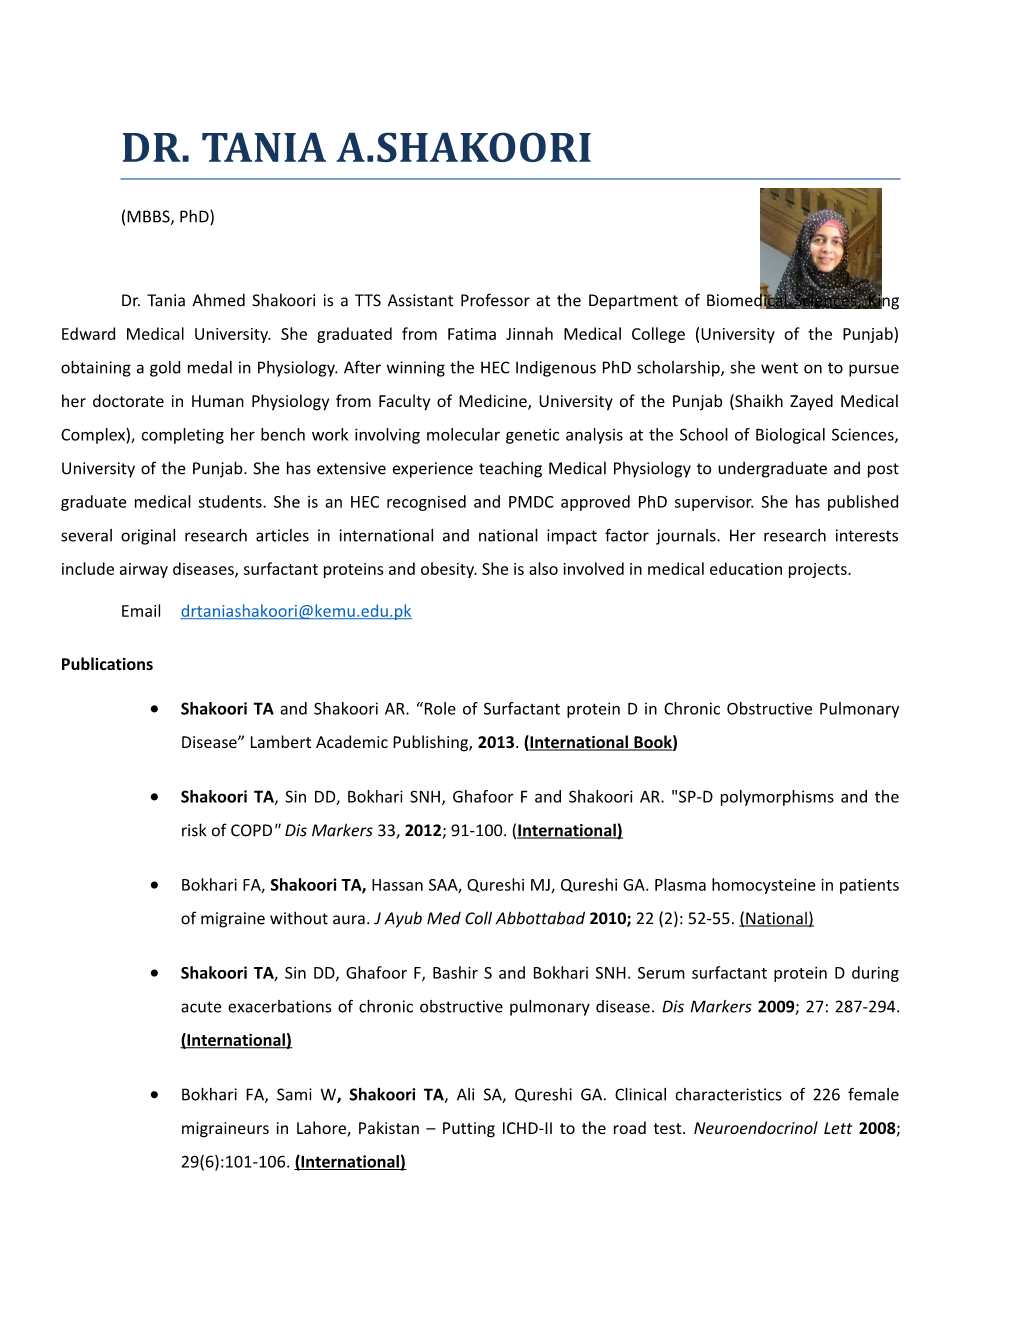 Dr. Tania Ahmed Shakoori Is a TTS Assistant Professor at the Department of Biomedical Sciences